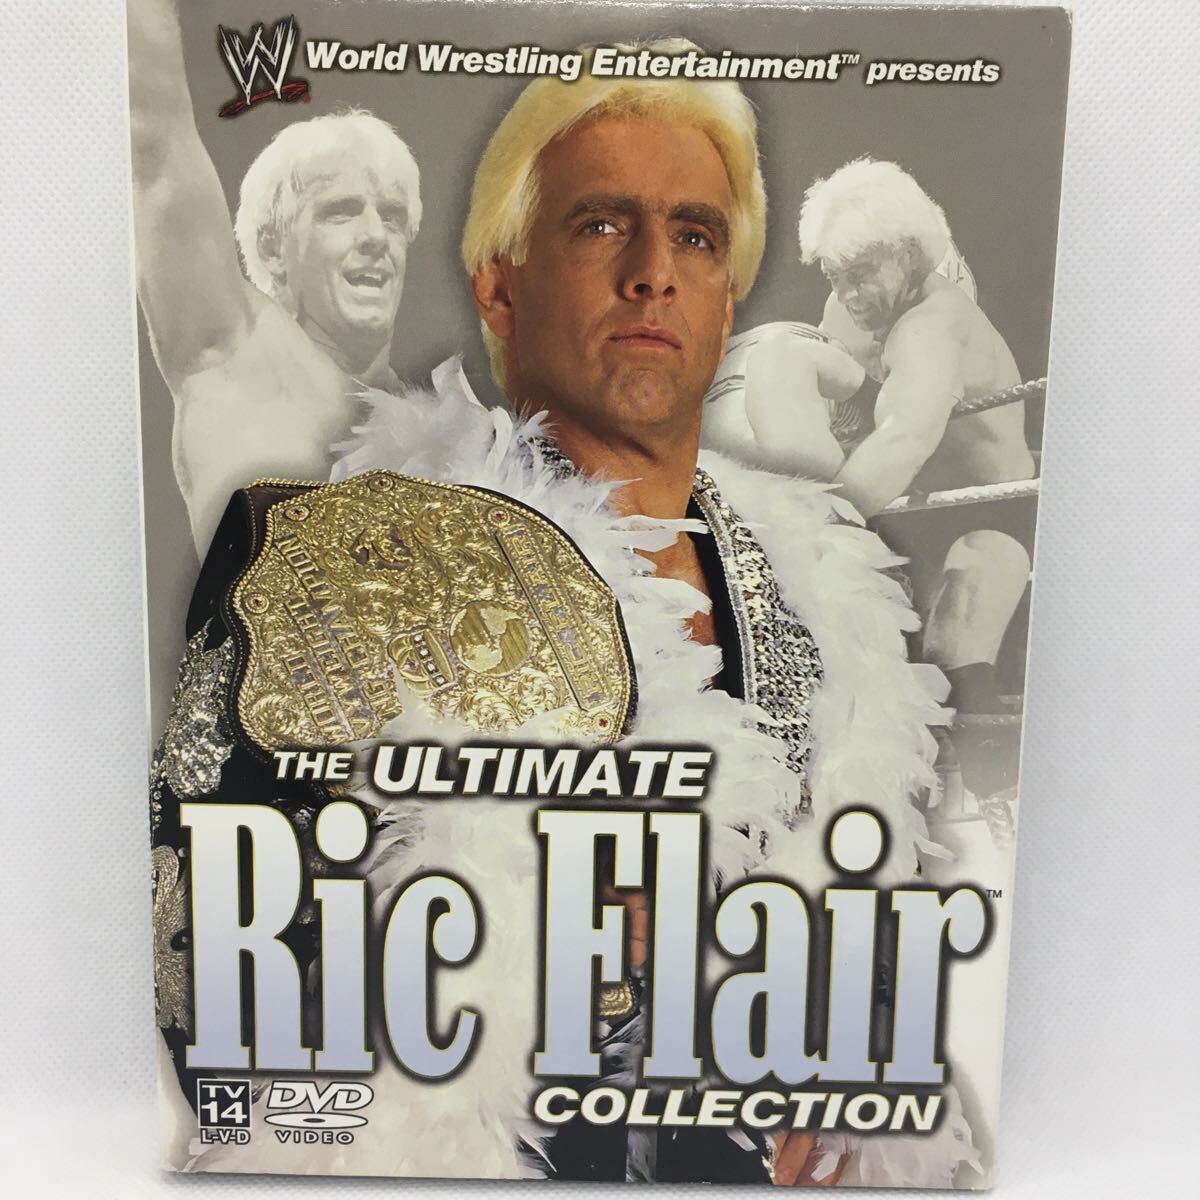 DVD『THE ULTIMATE Ric Flair COLLECTION 輸入盤』※動作確認済み/リージョン1/DVD３枚組/プロレス/WWE/Import/格闘技/　Ⅳ-1235_画像1